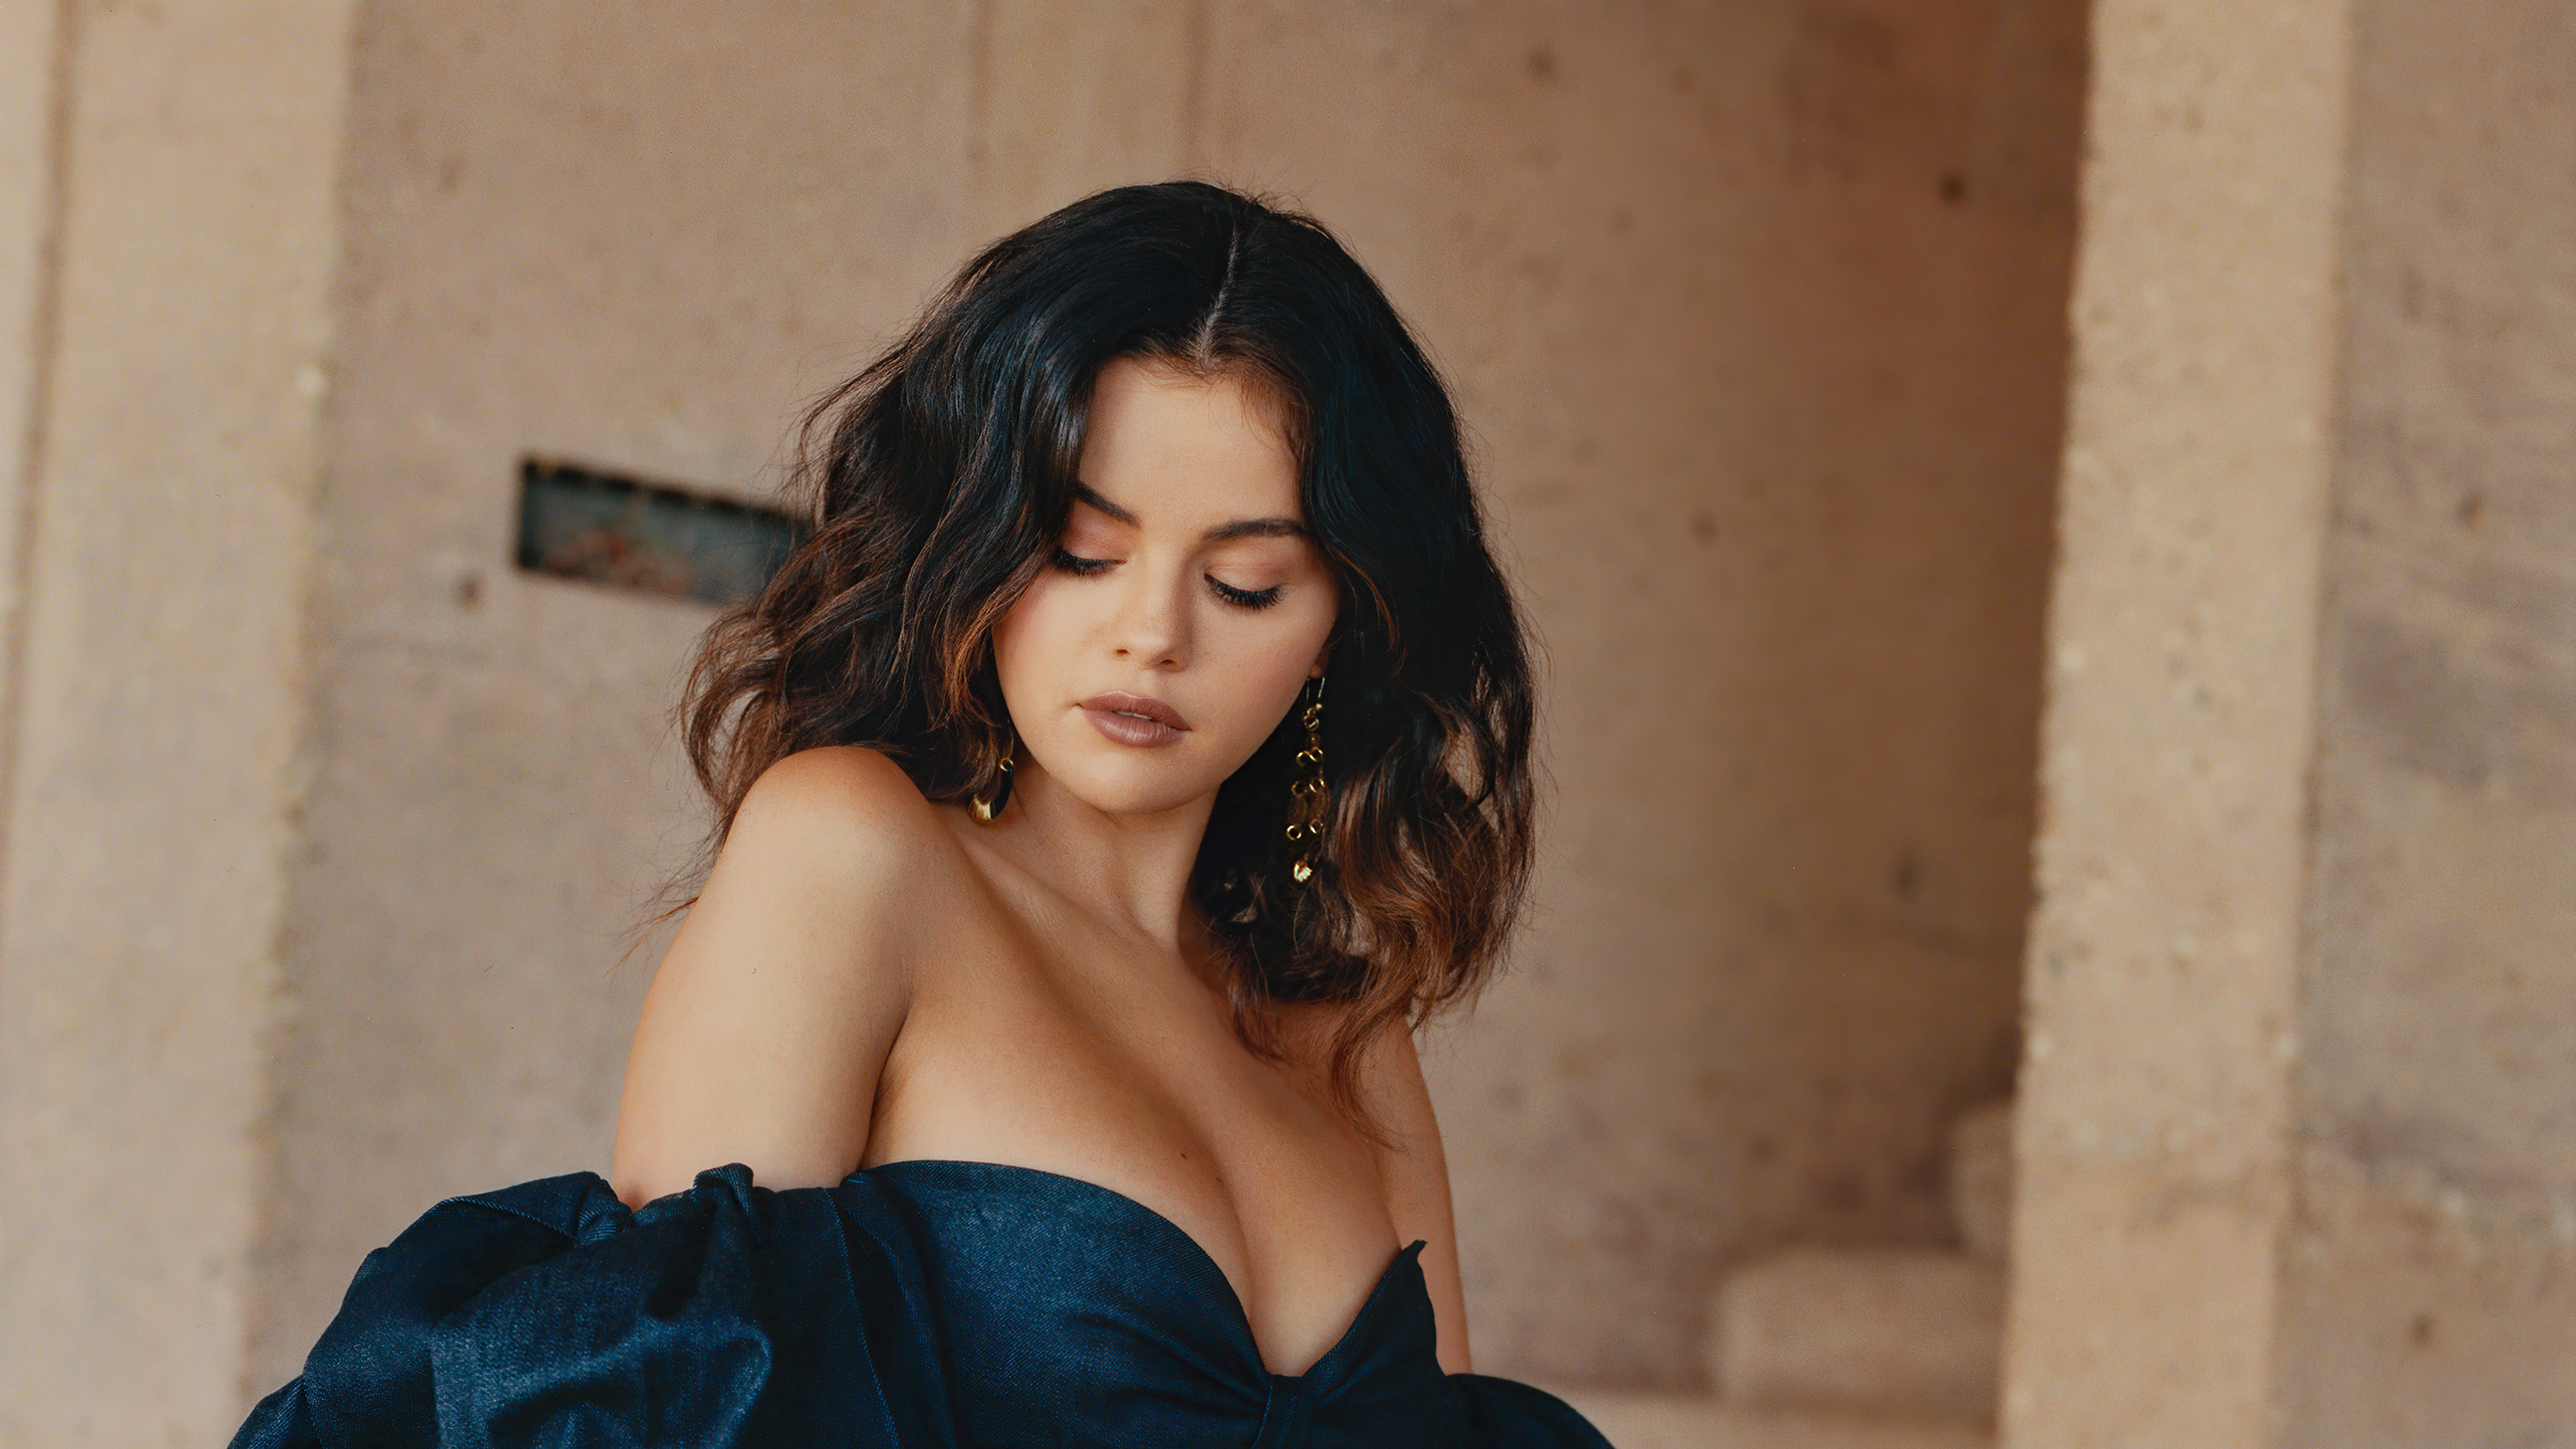 Selena gomez allure magazine hd celebrities k wallpapers images backgrounds photos and pictures